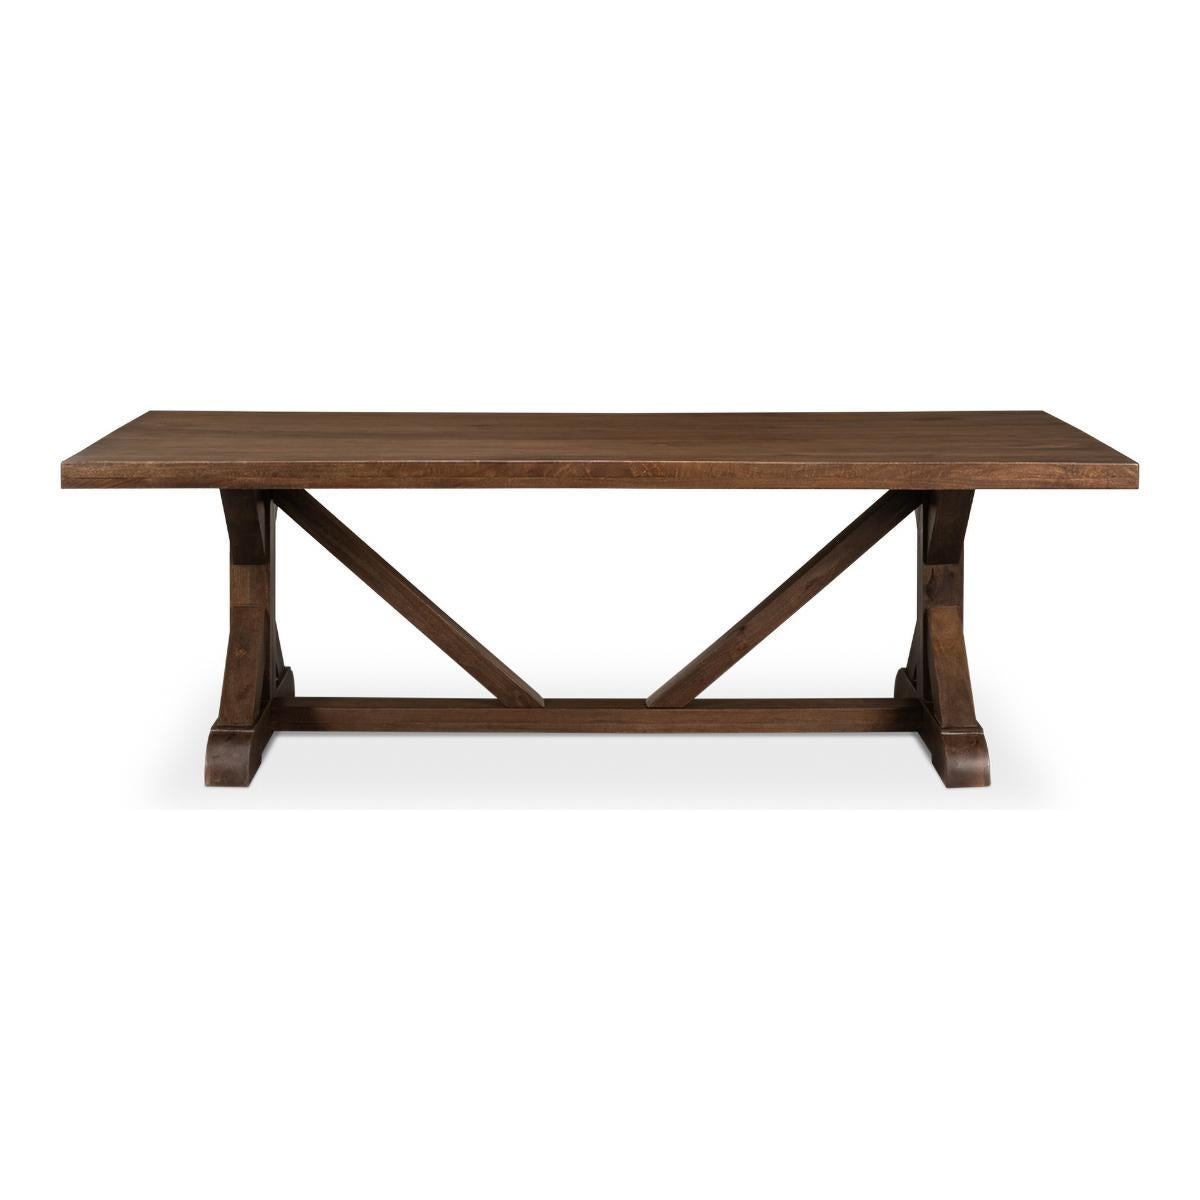 Farmhouse Refectory dining table is constructed of reclaimed wood in a walnut finish, with trestle end supports and a stretcher base.

Dimensions: 95